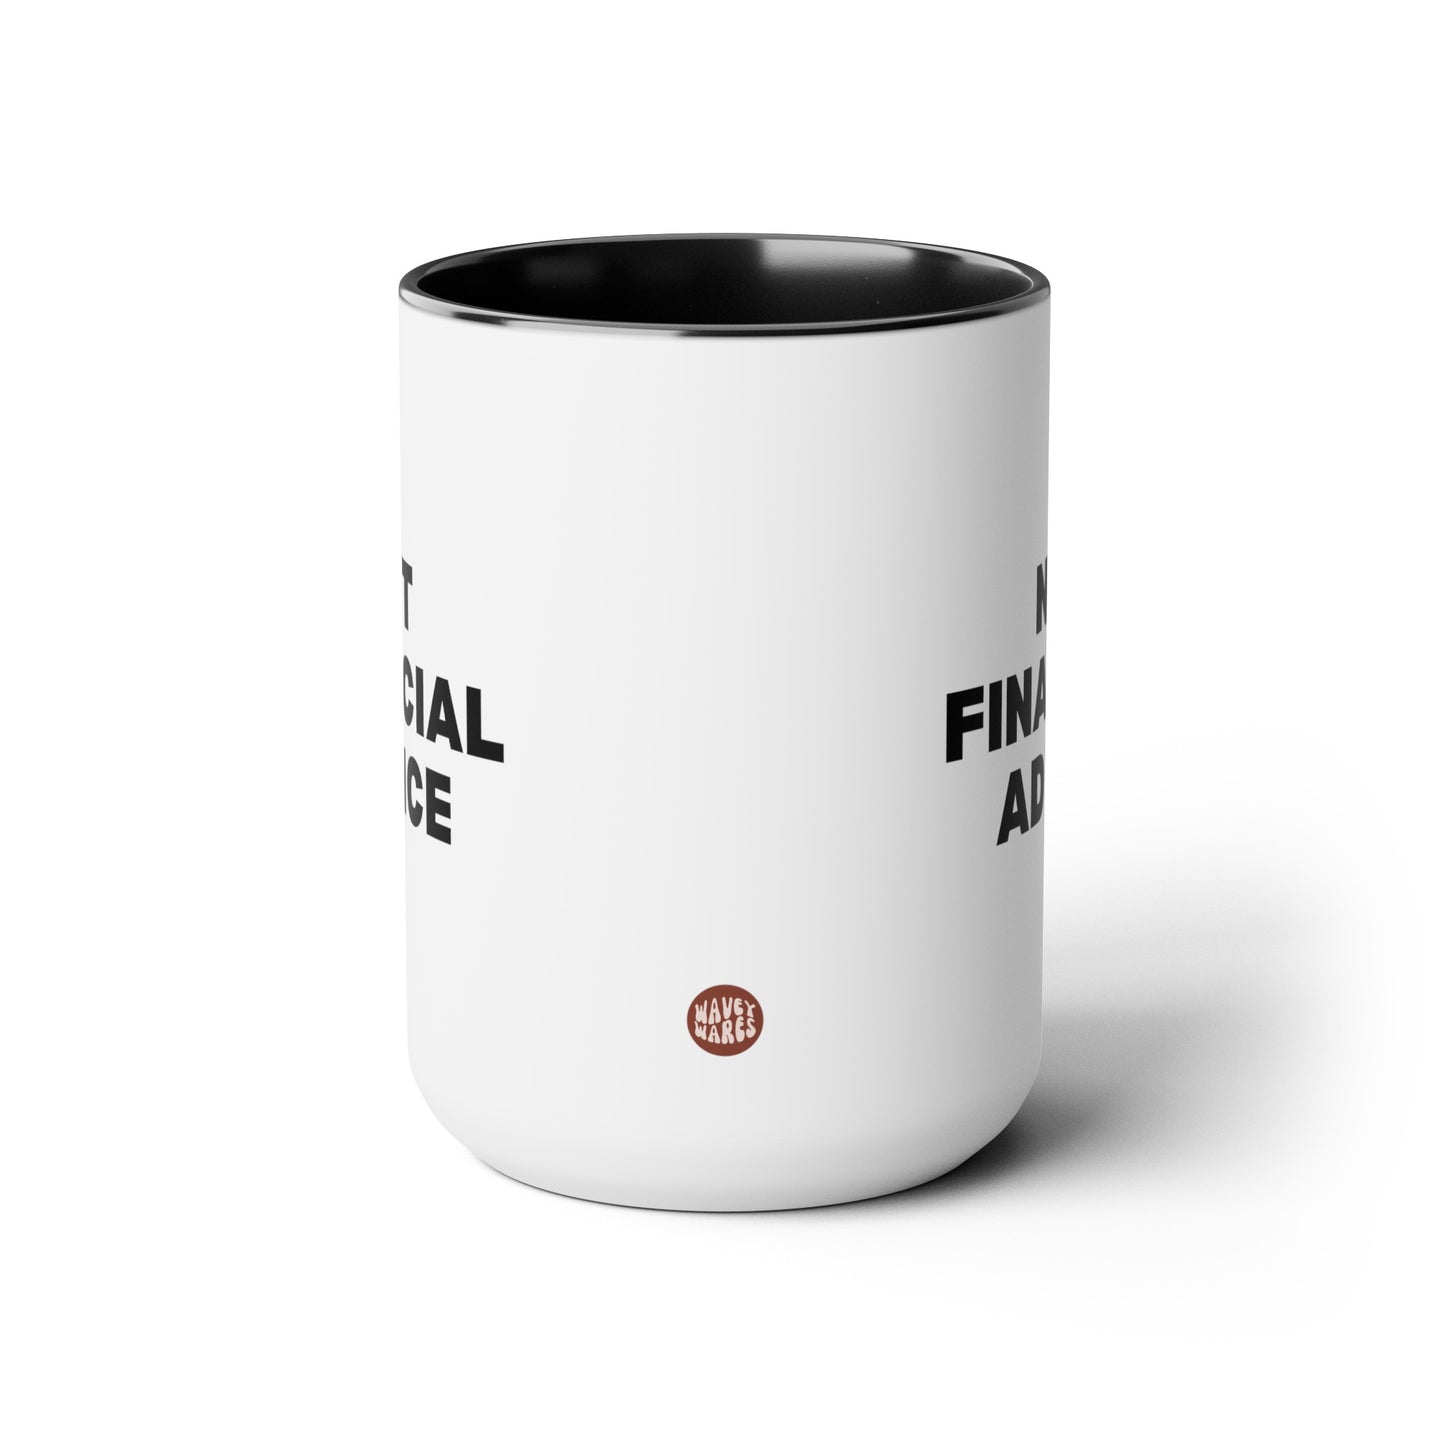 Not Financial Advice 15oz white with black accent funny large coffee mug gift for finance bro advisor specialist joke waveywares wavey wares wavywares wavy wares side